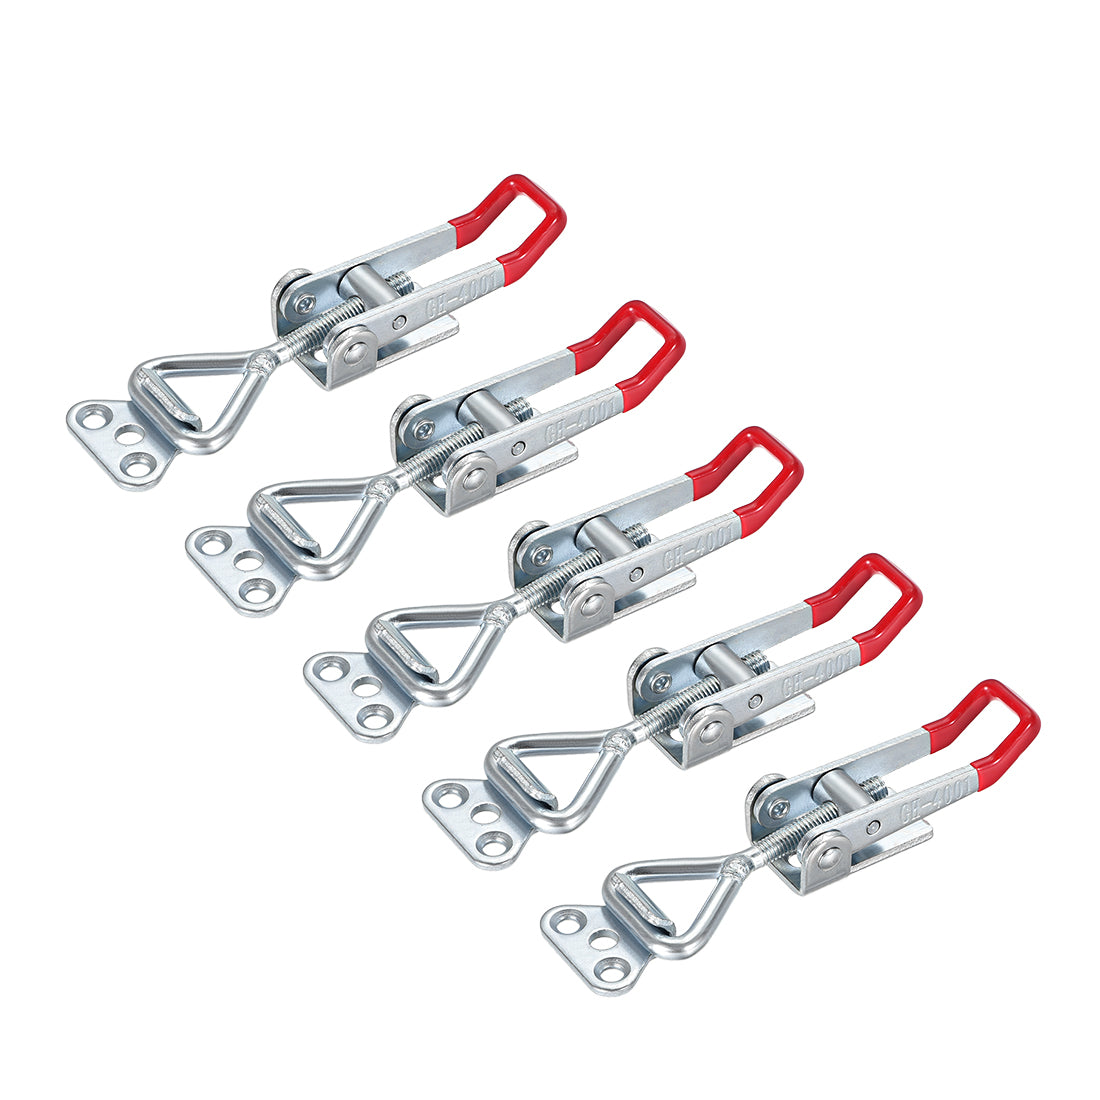 uxcell Uxcell 5 Pcs Hand Tool Latch Action Toggle Clamp Quick Release Clamp 330 lbs/150kg Holding Capacity